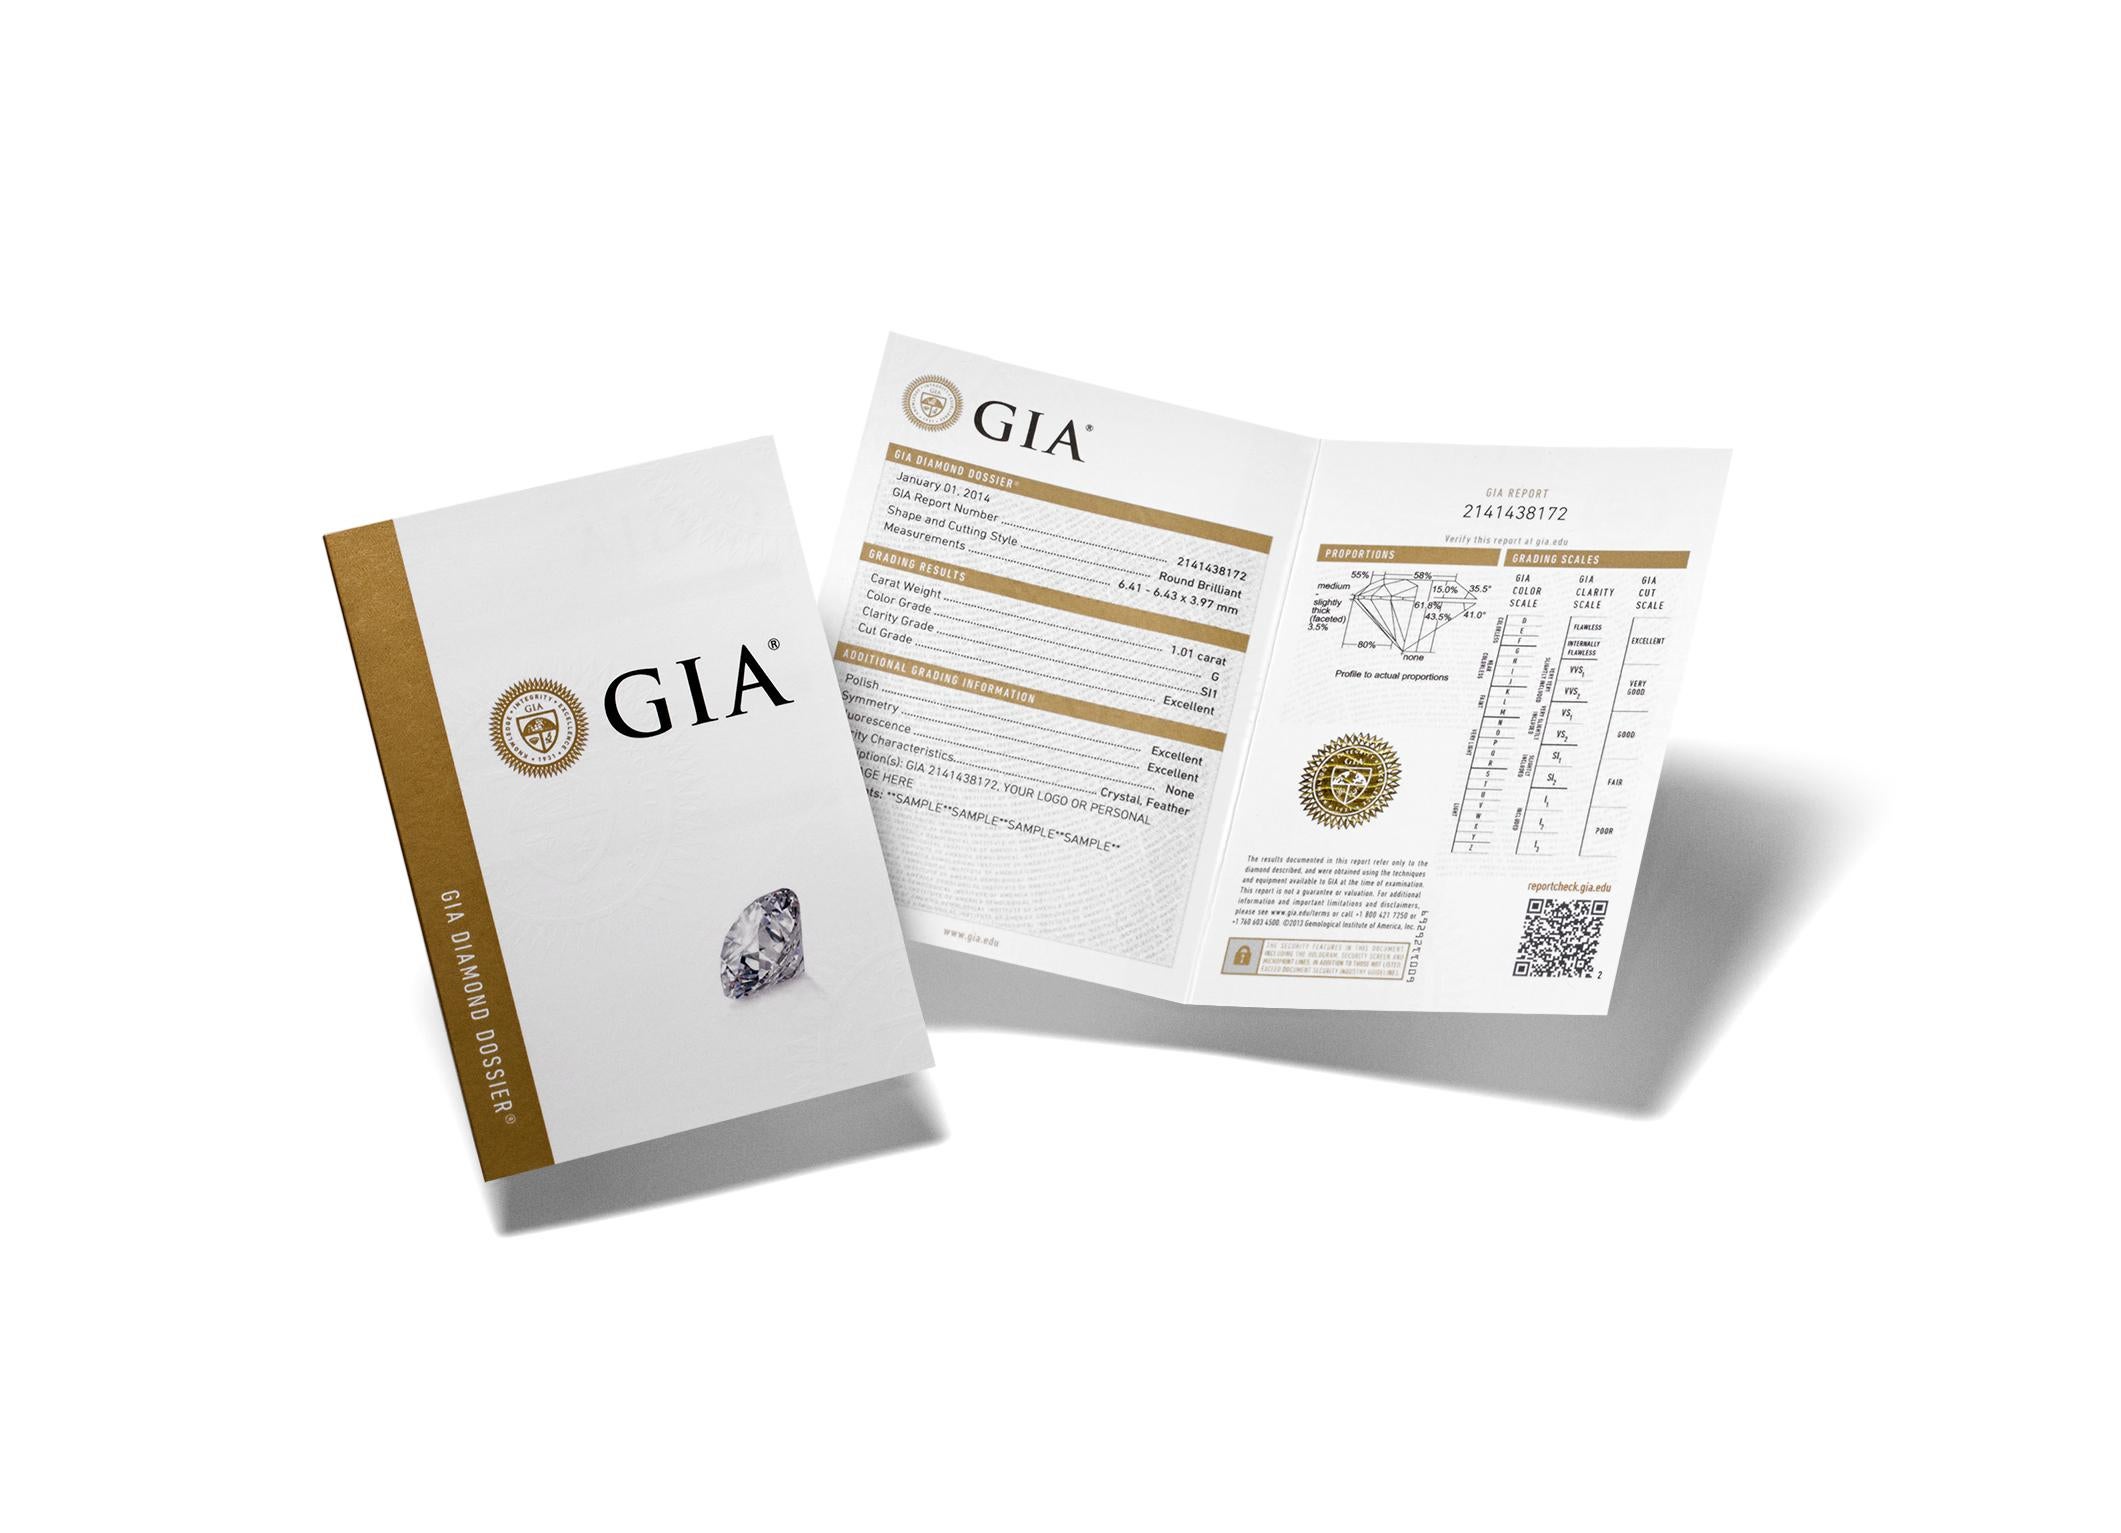 GIA Certified 0.50 Carat, F/IF, Brilliant Cut, Excellent Natural Diamond

Perfect Brilliants for perfect gifts.

5 C's:
Certificate: GIA
Carat: 0.50ct
Color: F
Clarity: IF(Internally Flawless)
Cut: Excellent

Polish: Excellent
Symmetry: